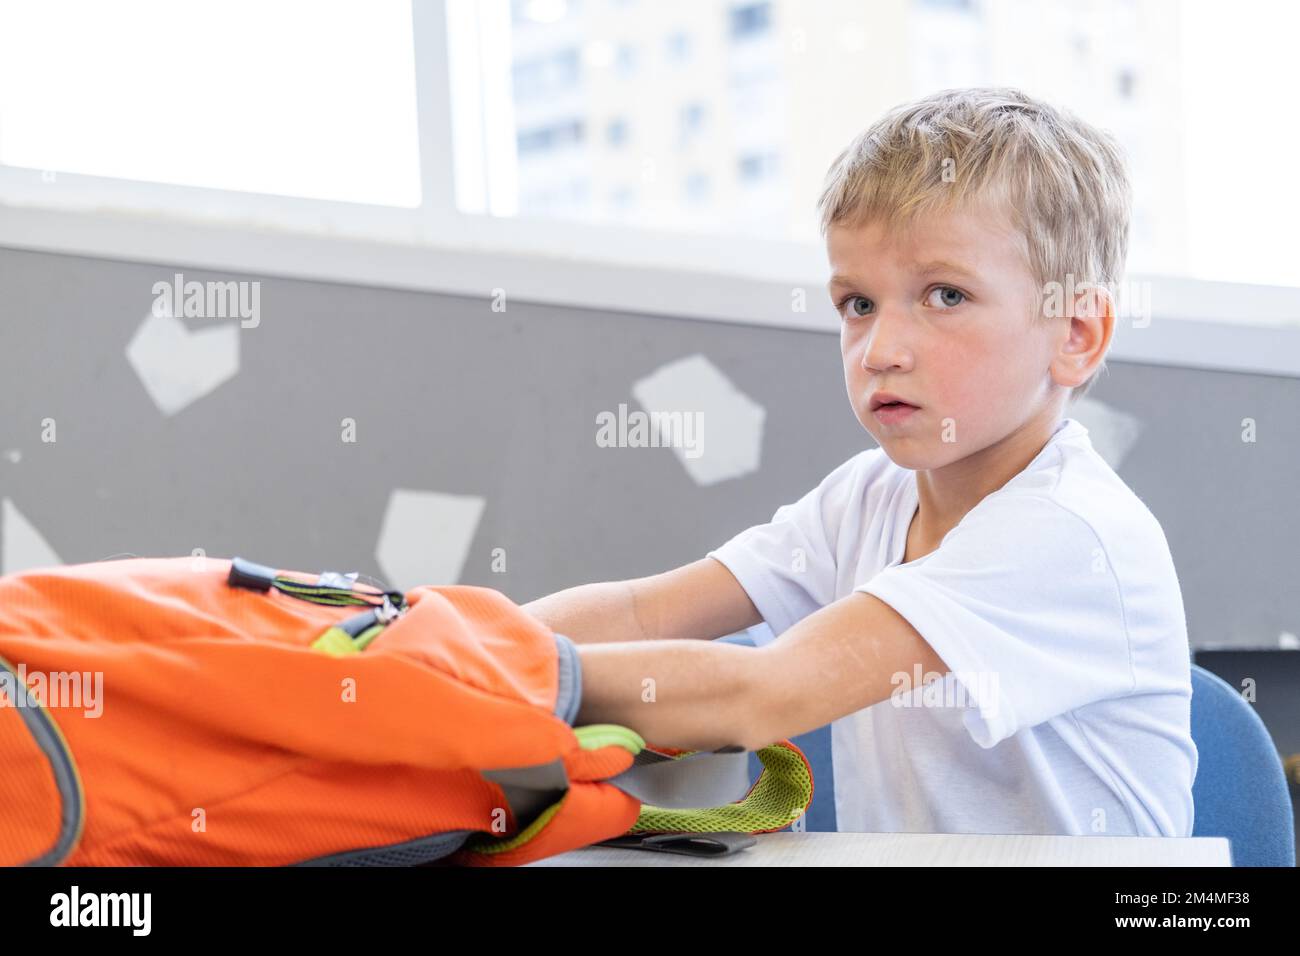 mom and the boy are packing a backpack for school, school